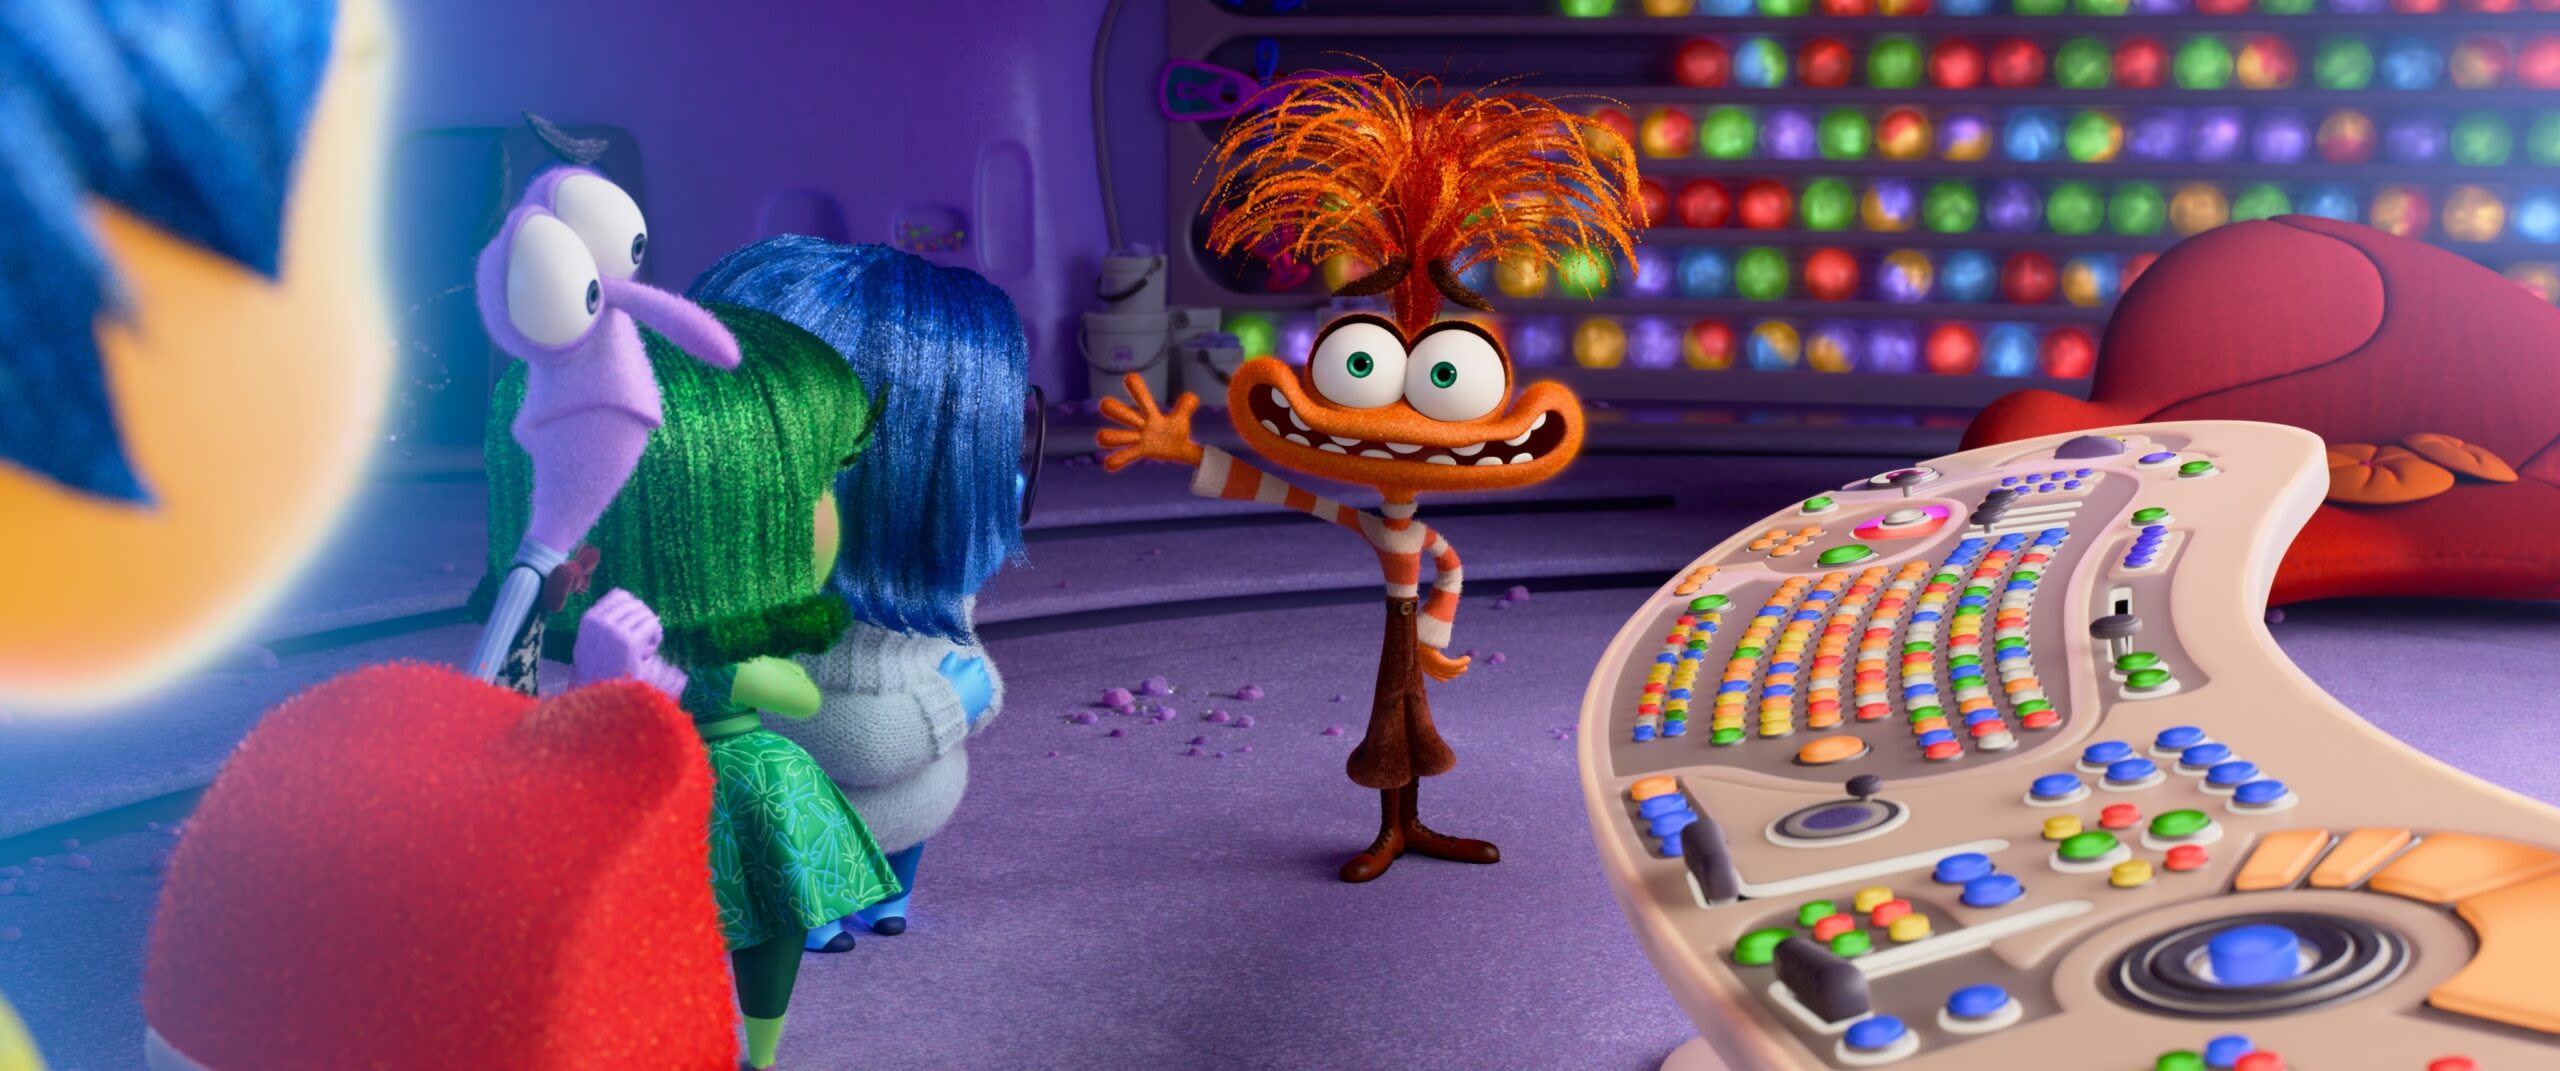 ‘Inside Out 2’ Editor On Creating ‘Special Moments’ In The Upcoming Disney/Pixar Film